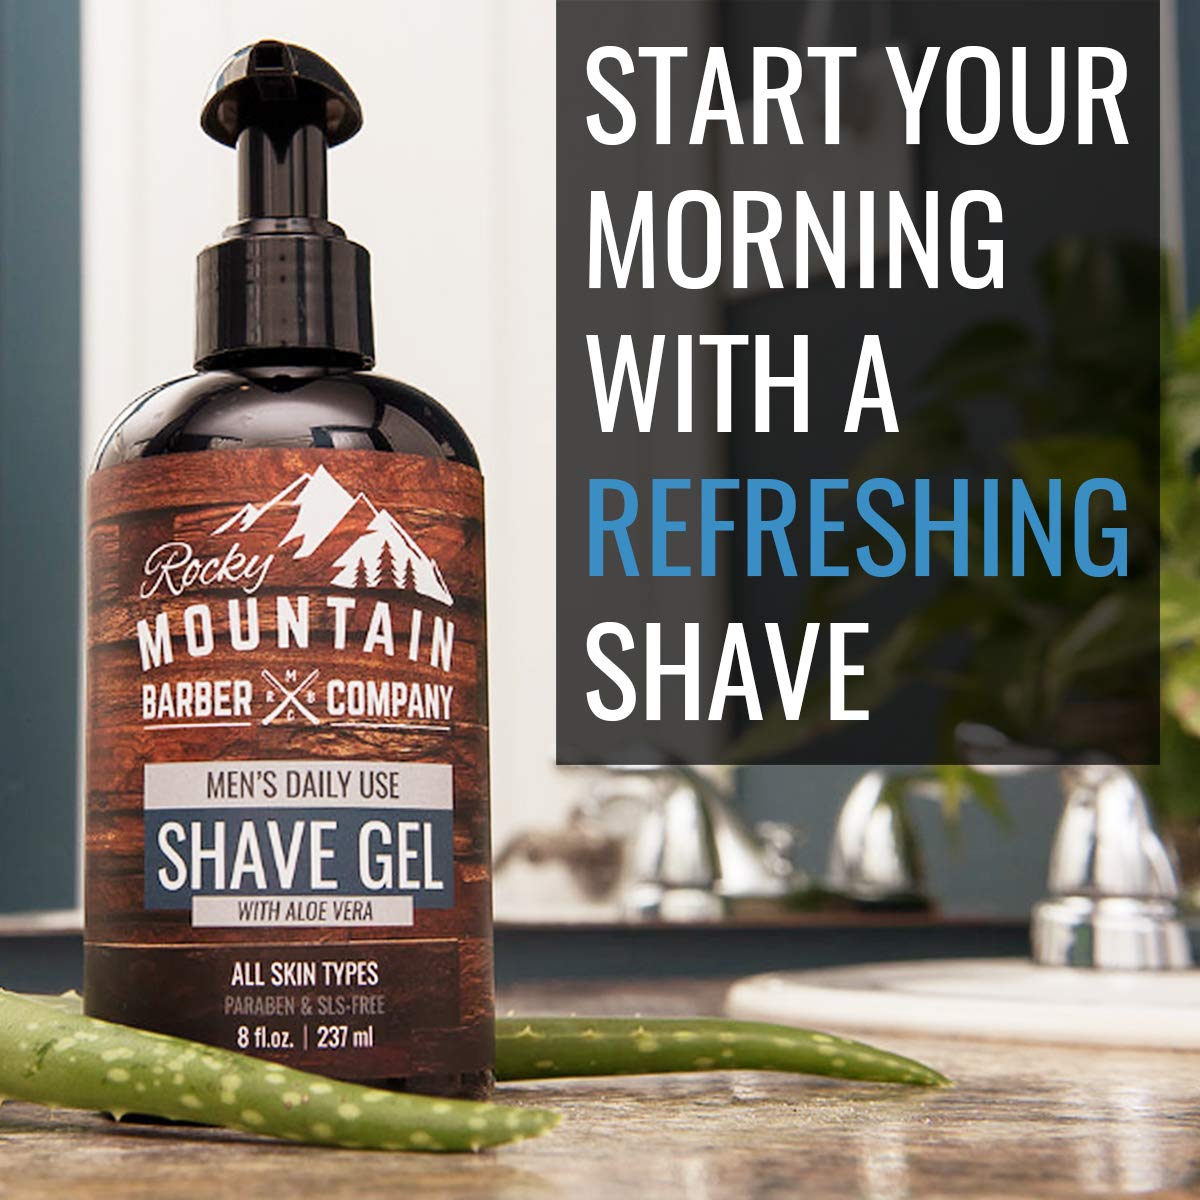 Men's Shave Gel - Clear Shaving Gel So You Can See Where You Are Shaving – For Full Shaves and Tightening Beard Lines - 8oz by Rocky Mountain Barber Company